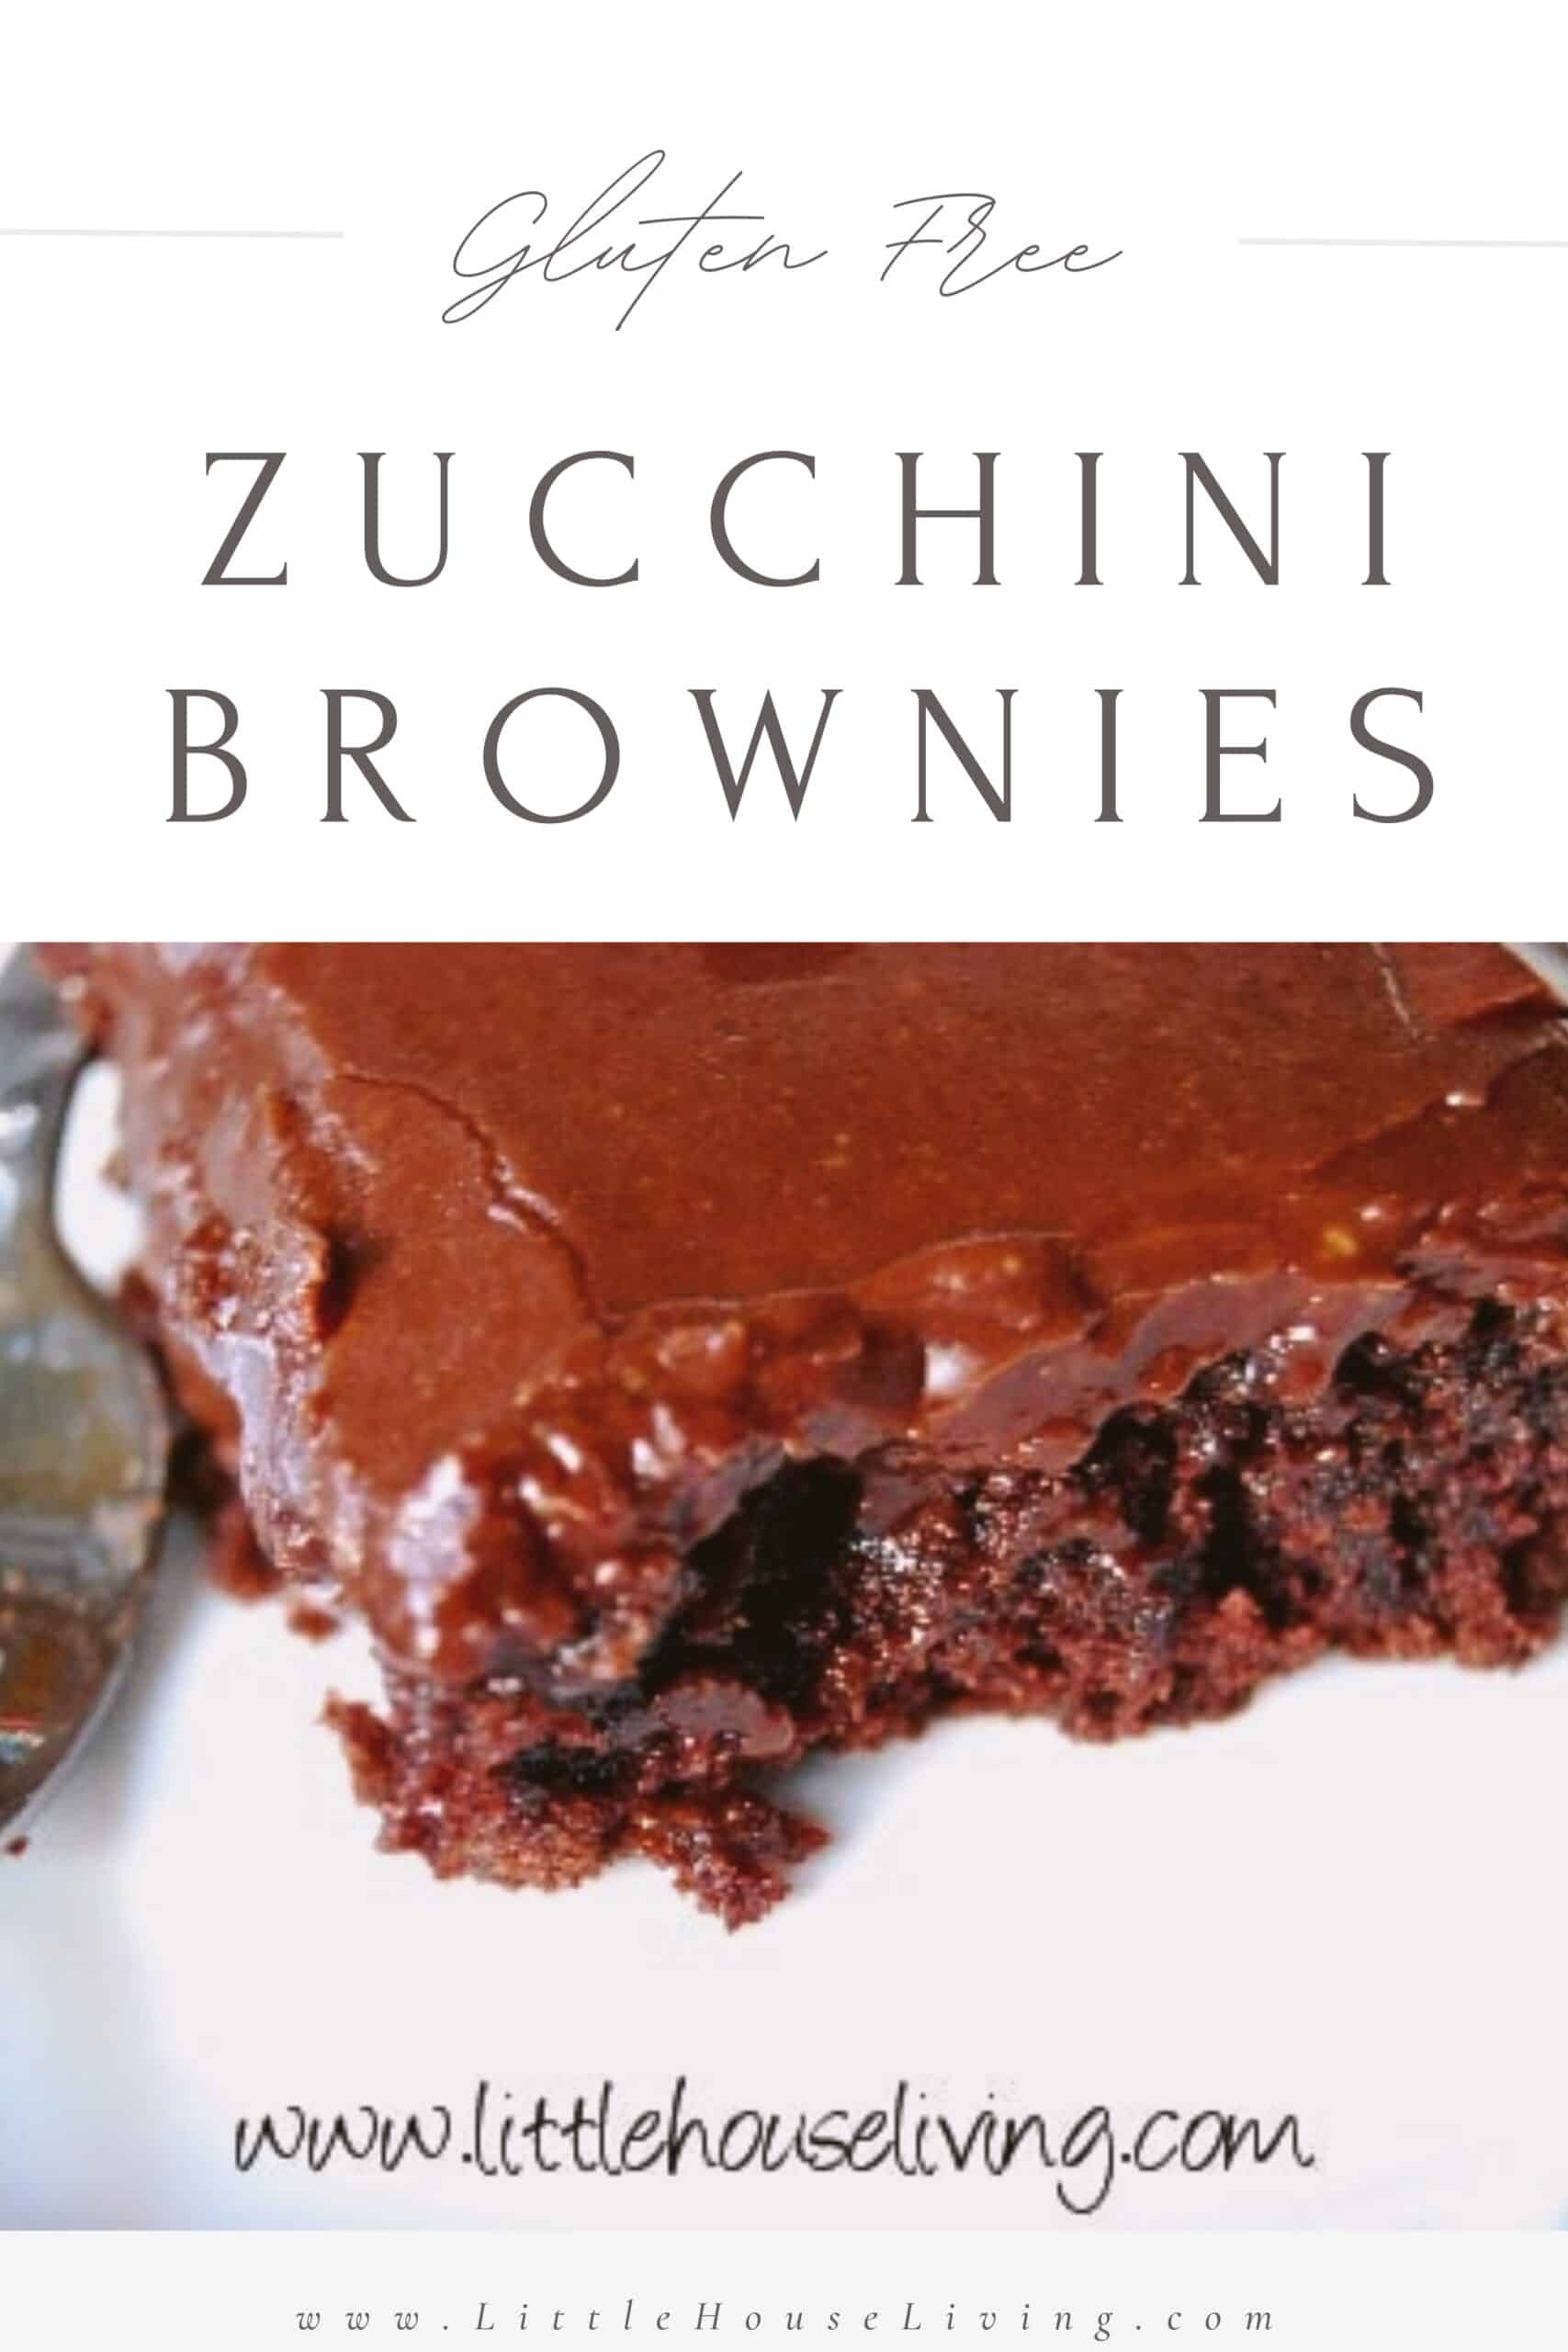 Zucchini Brownies are one of our treats. When I started a Gluten Free diet it was in the middle of harvest season and we had zucchini coming out of our ears.